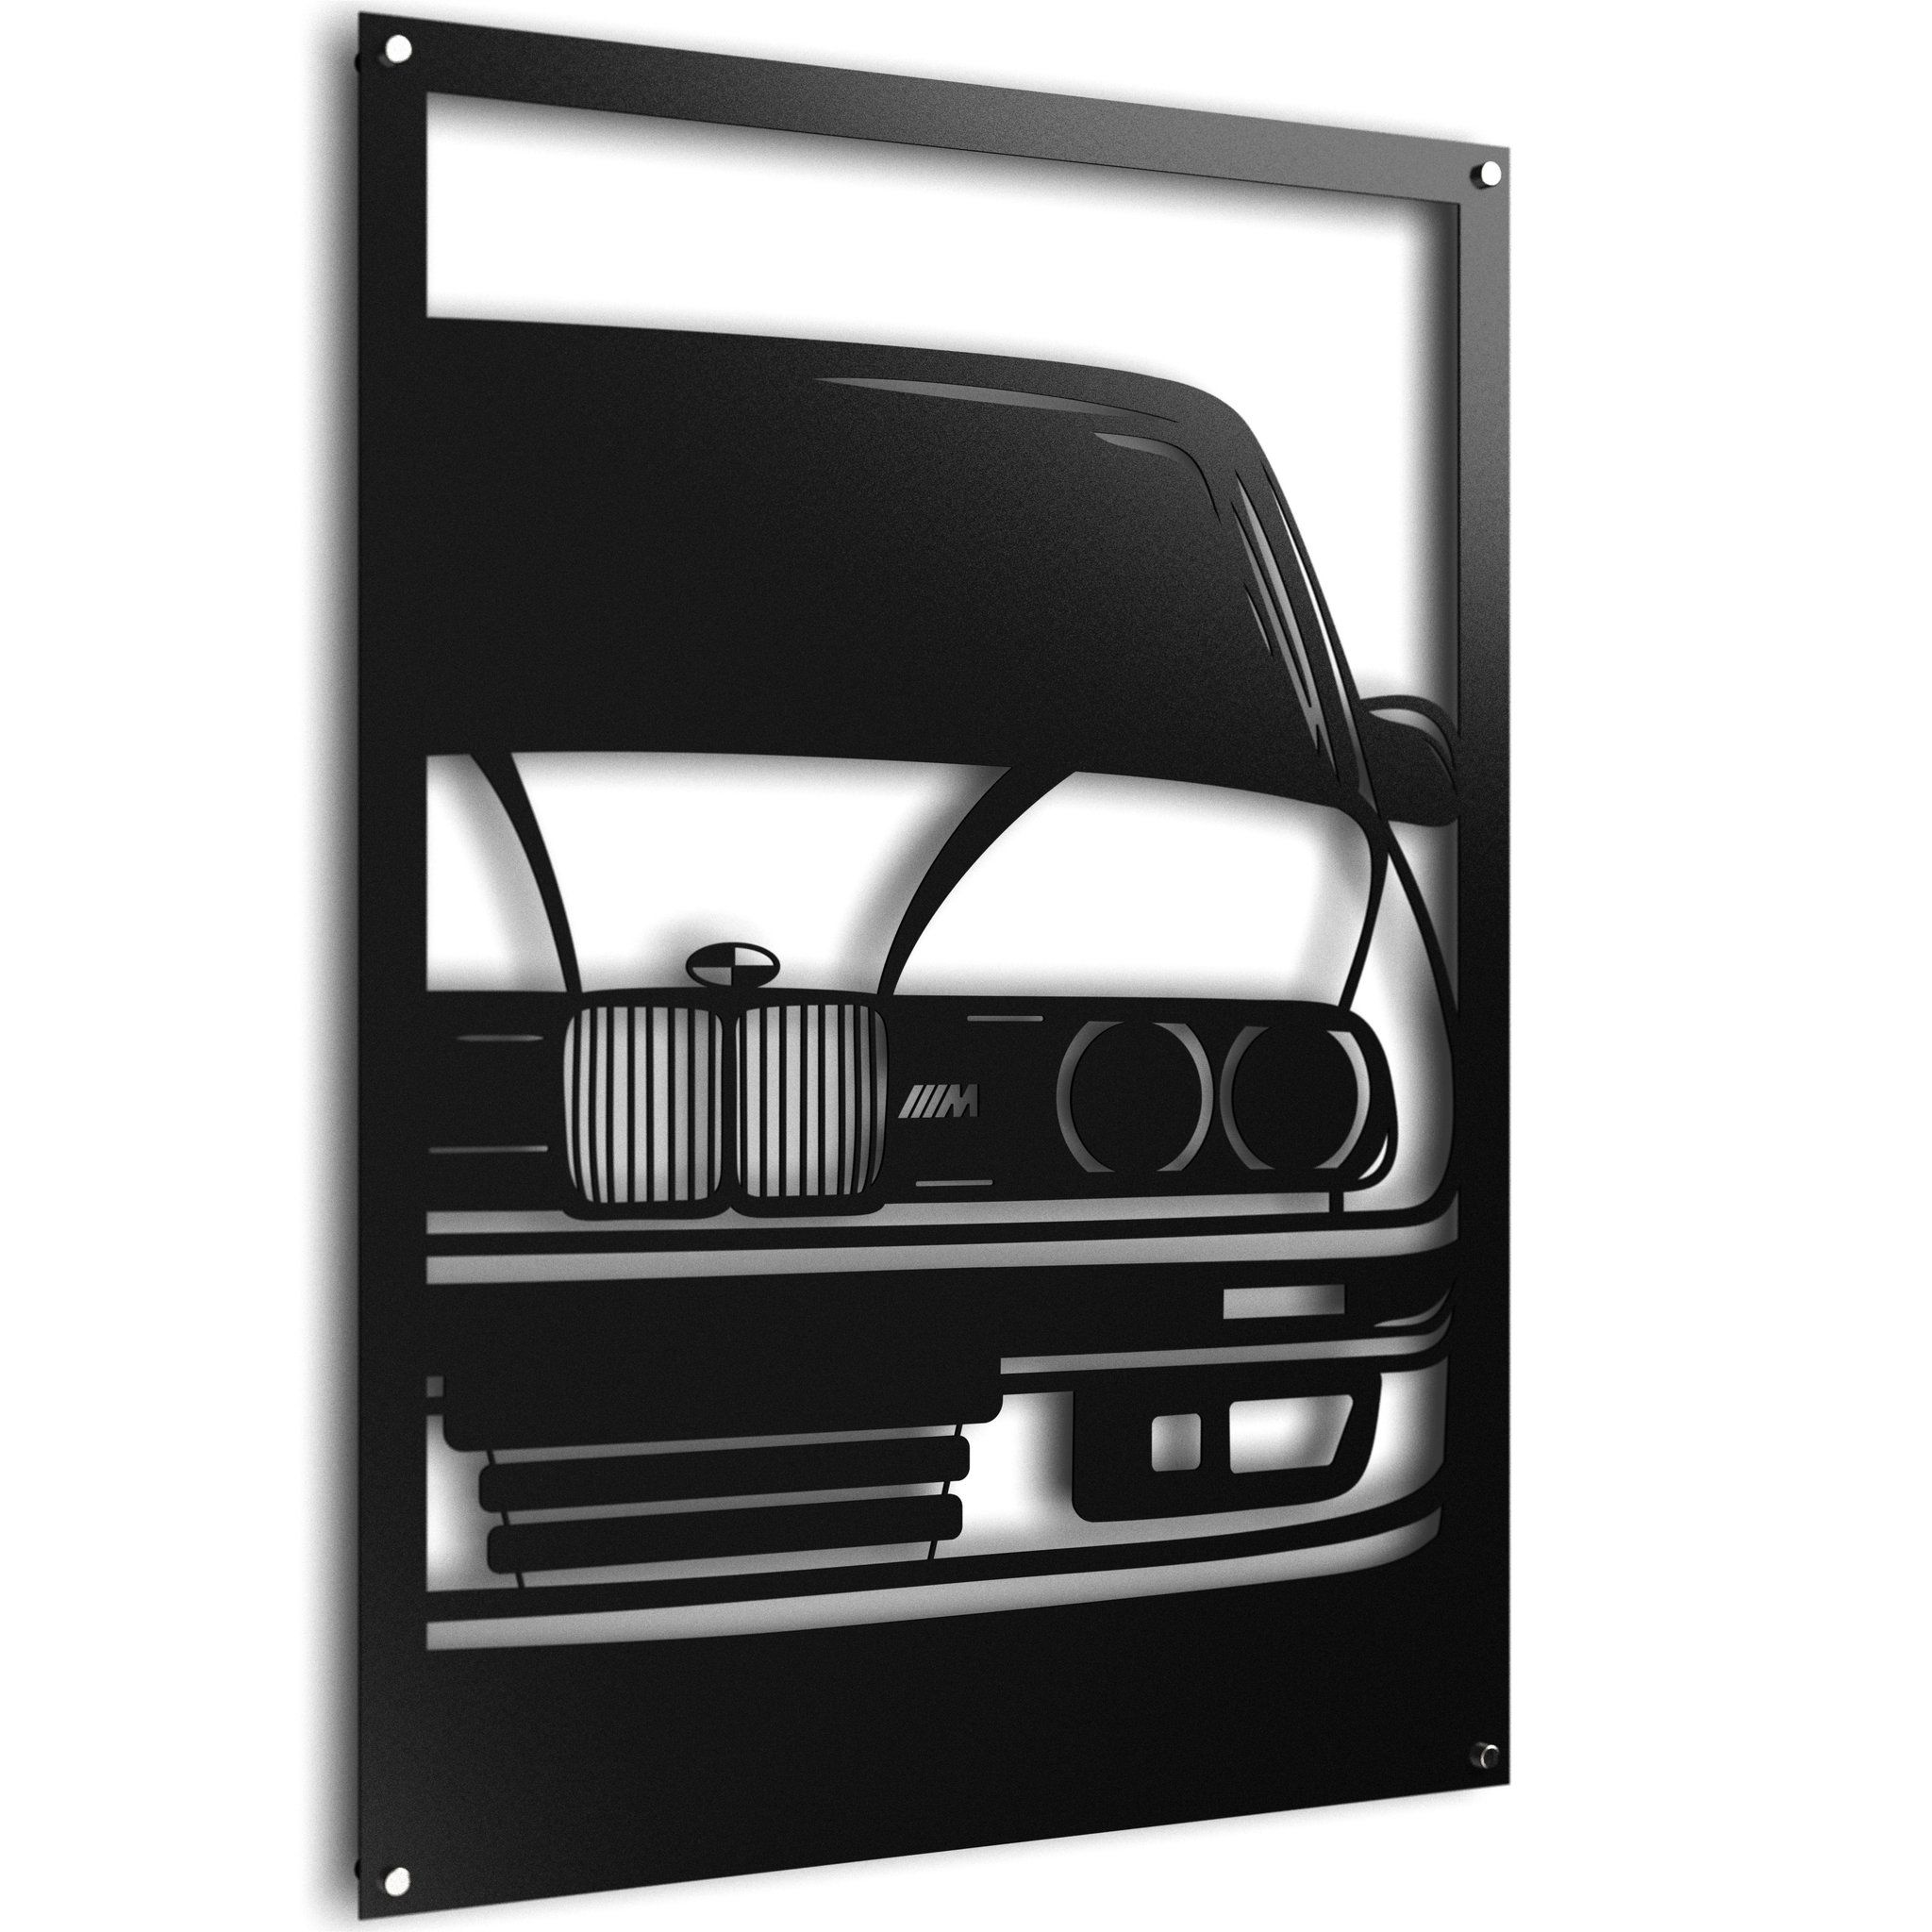 BMW 325i Shadow line Inspired Wall Art Man Cave Home Décor - 60x80cm